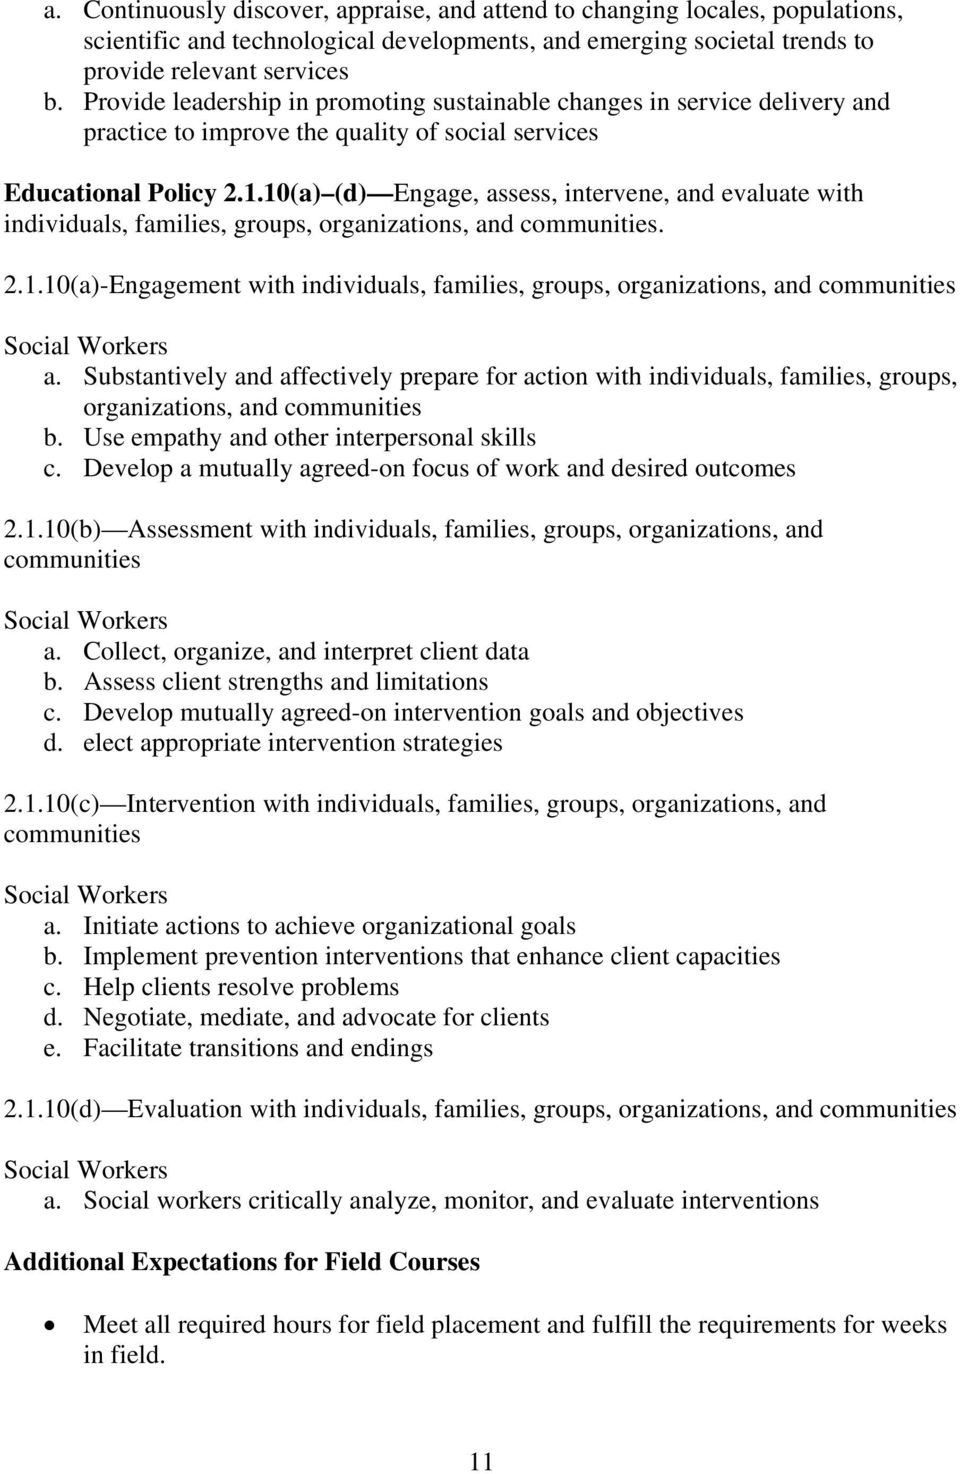 10(a) (d) Engage, assess, intervene, and evaluate with individuals, families, groups, organizations, and communities. 2.1.10(a)-Engagement with individuals, families, groups, organizations, and communities Social Workers a.